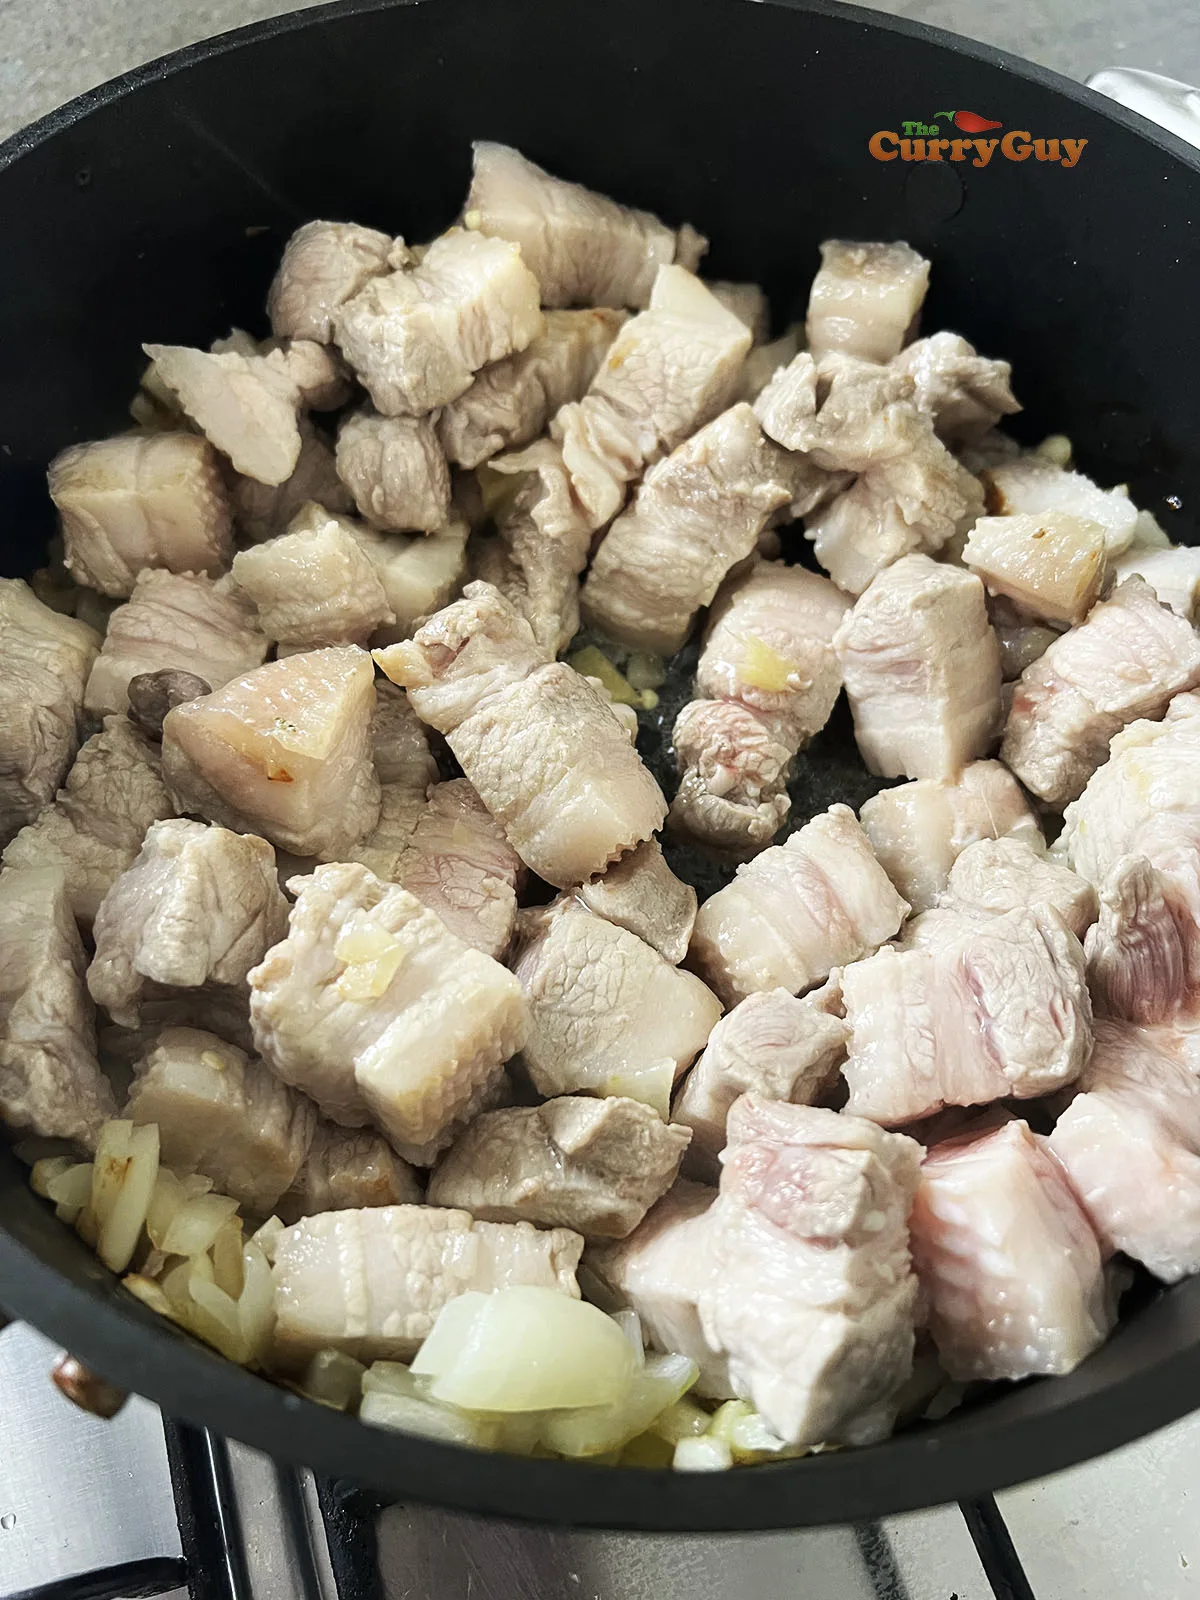 Browning the meat in the pan